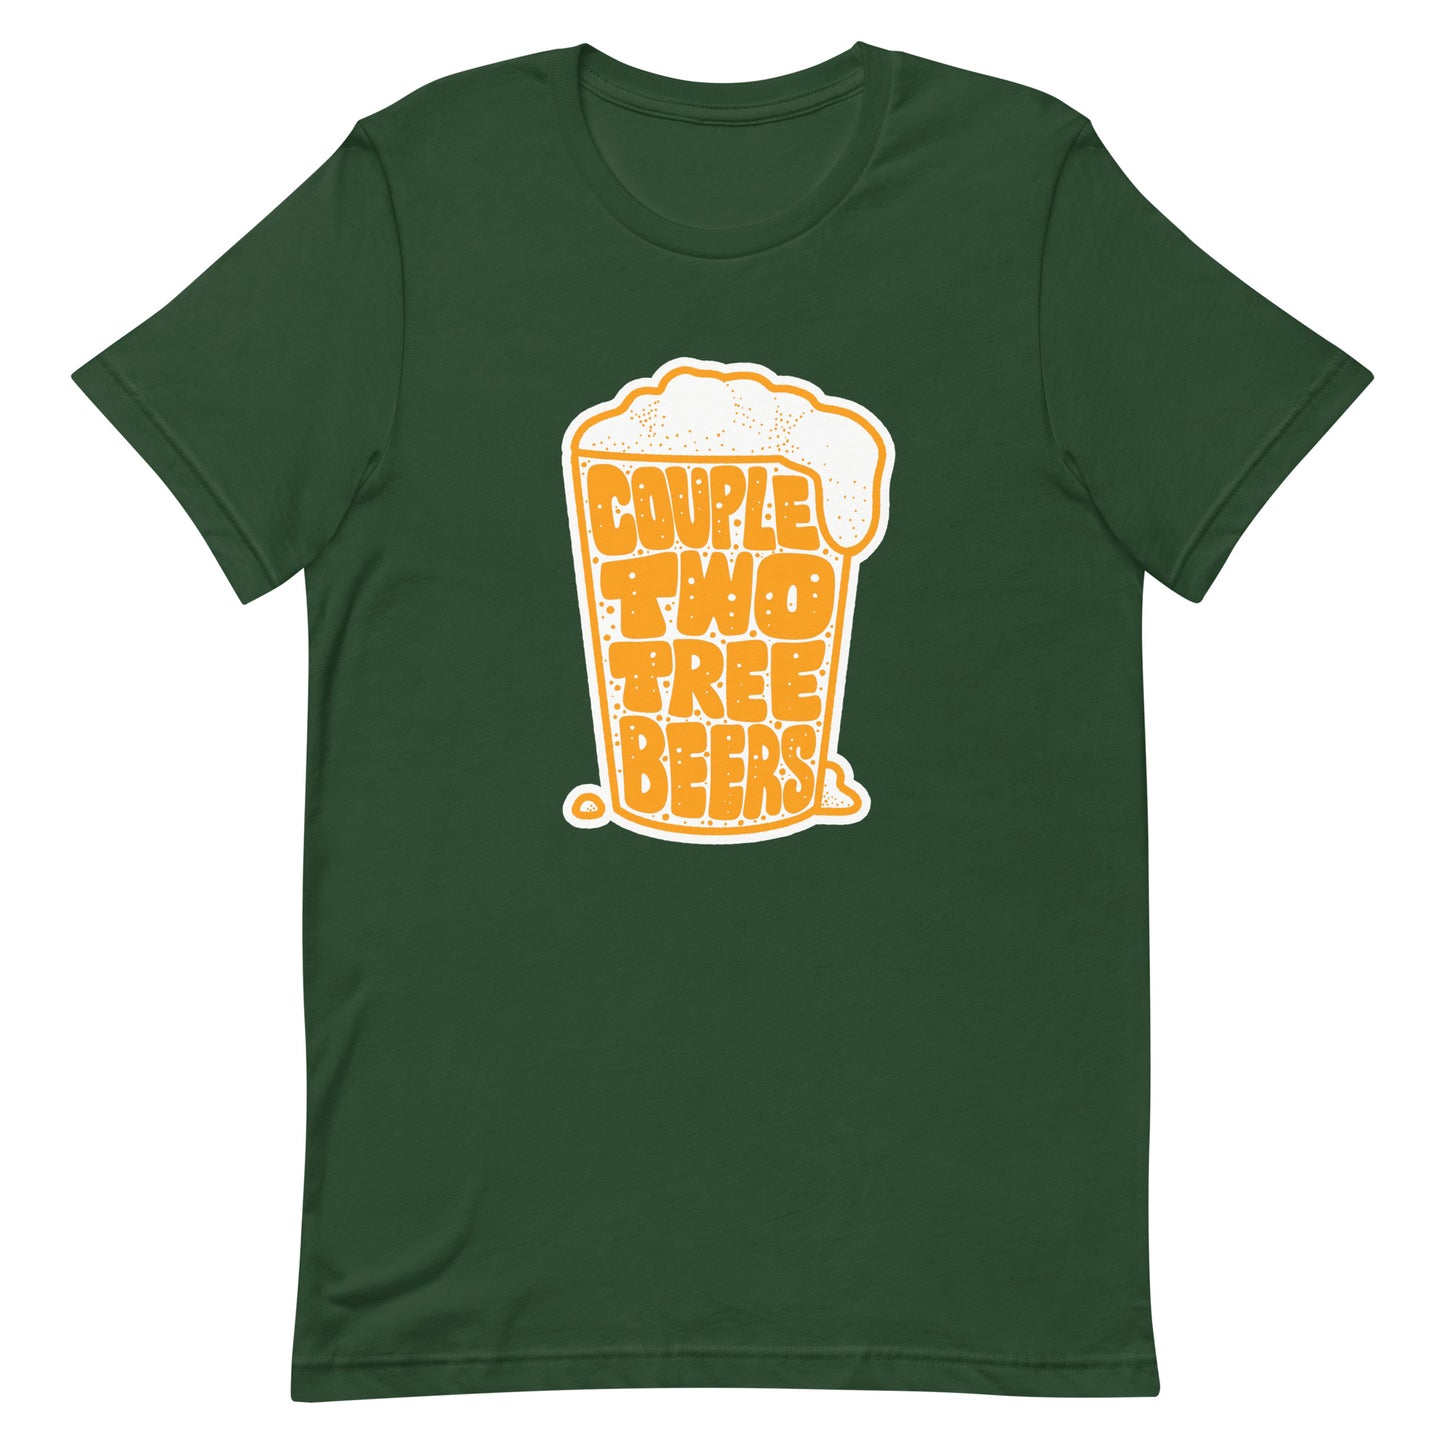 Couple two tree beers - Midwest Beer Drinking T-shirt